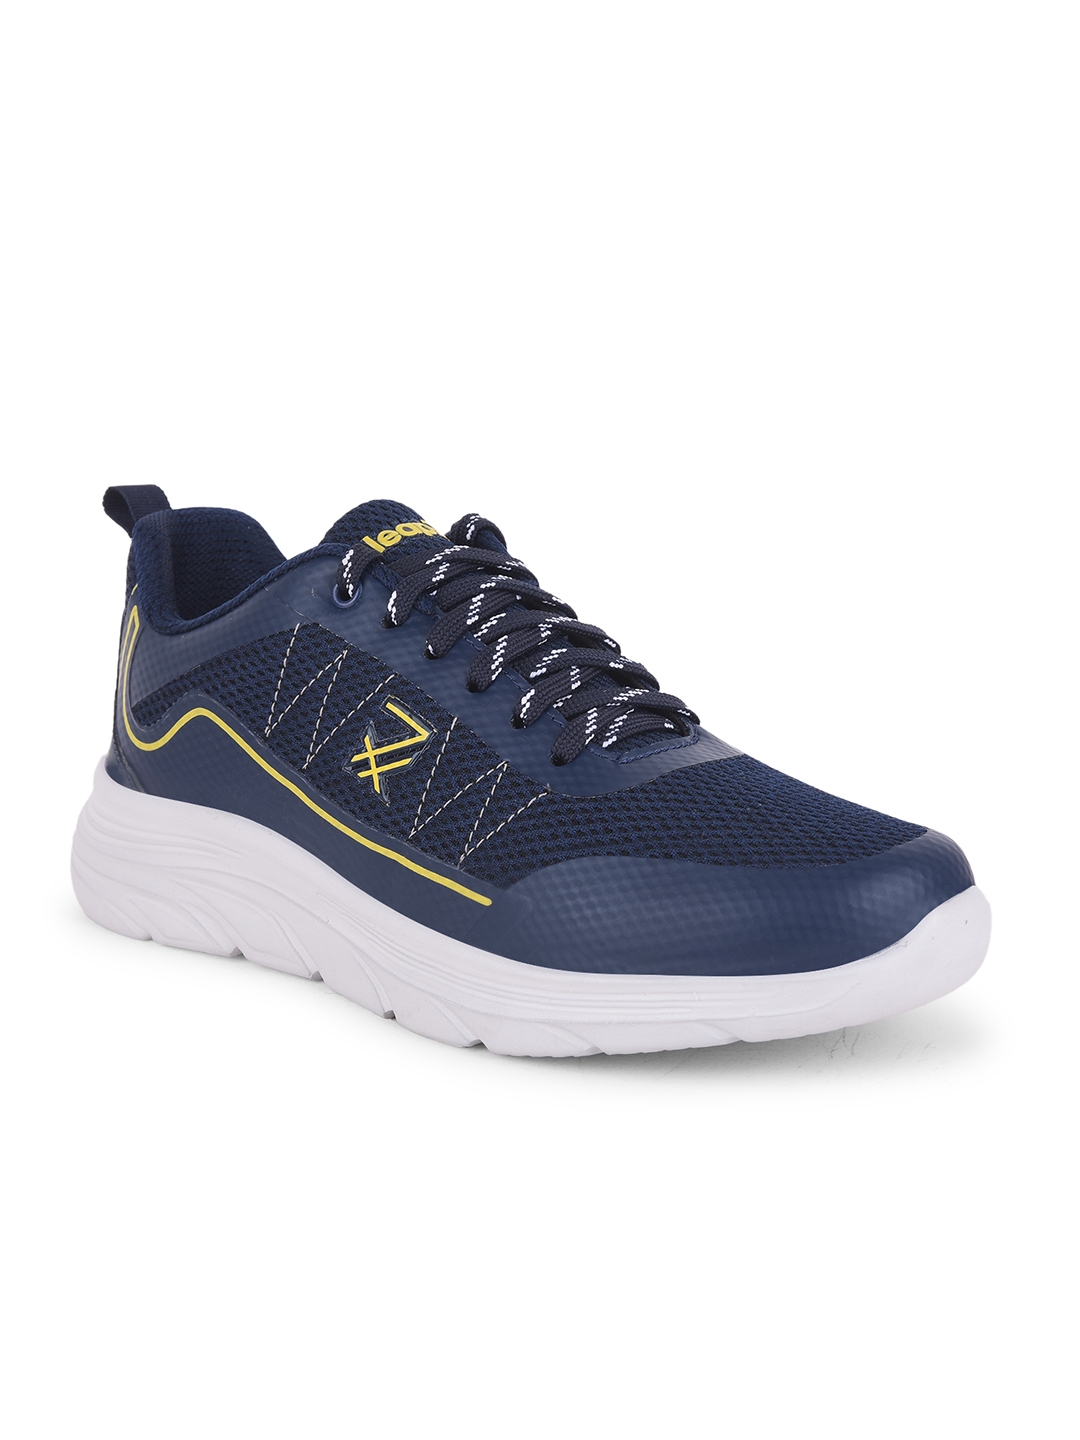 Liberty | Men's LEAP7X Navy Blue Solid Running Shoes